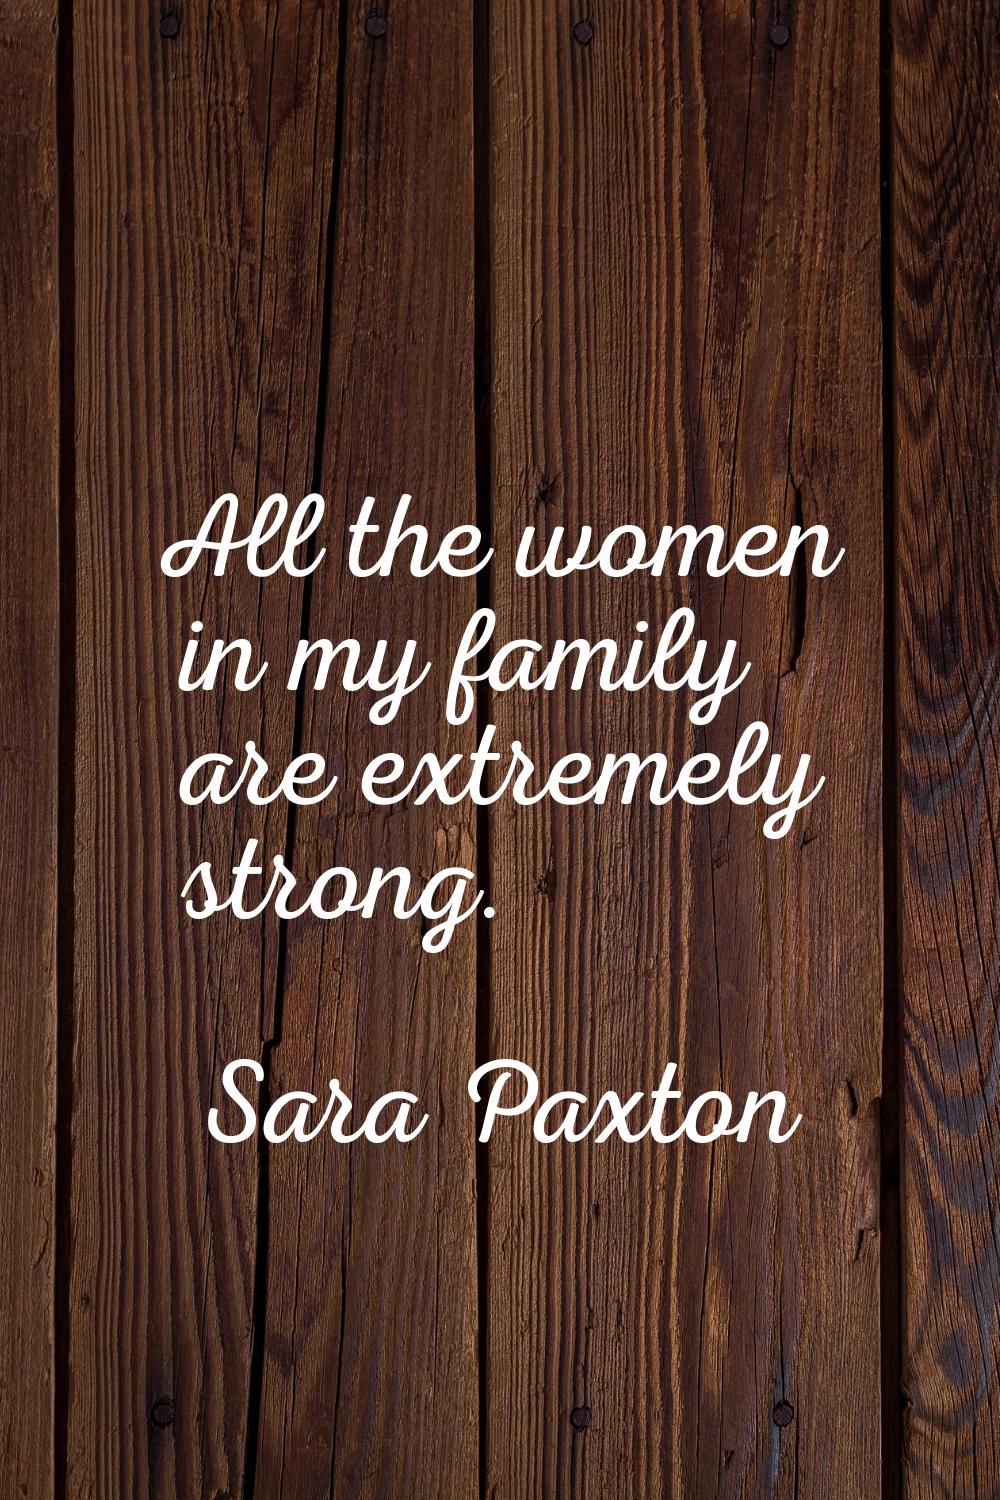 All the women in my family are extremely strong.